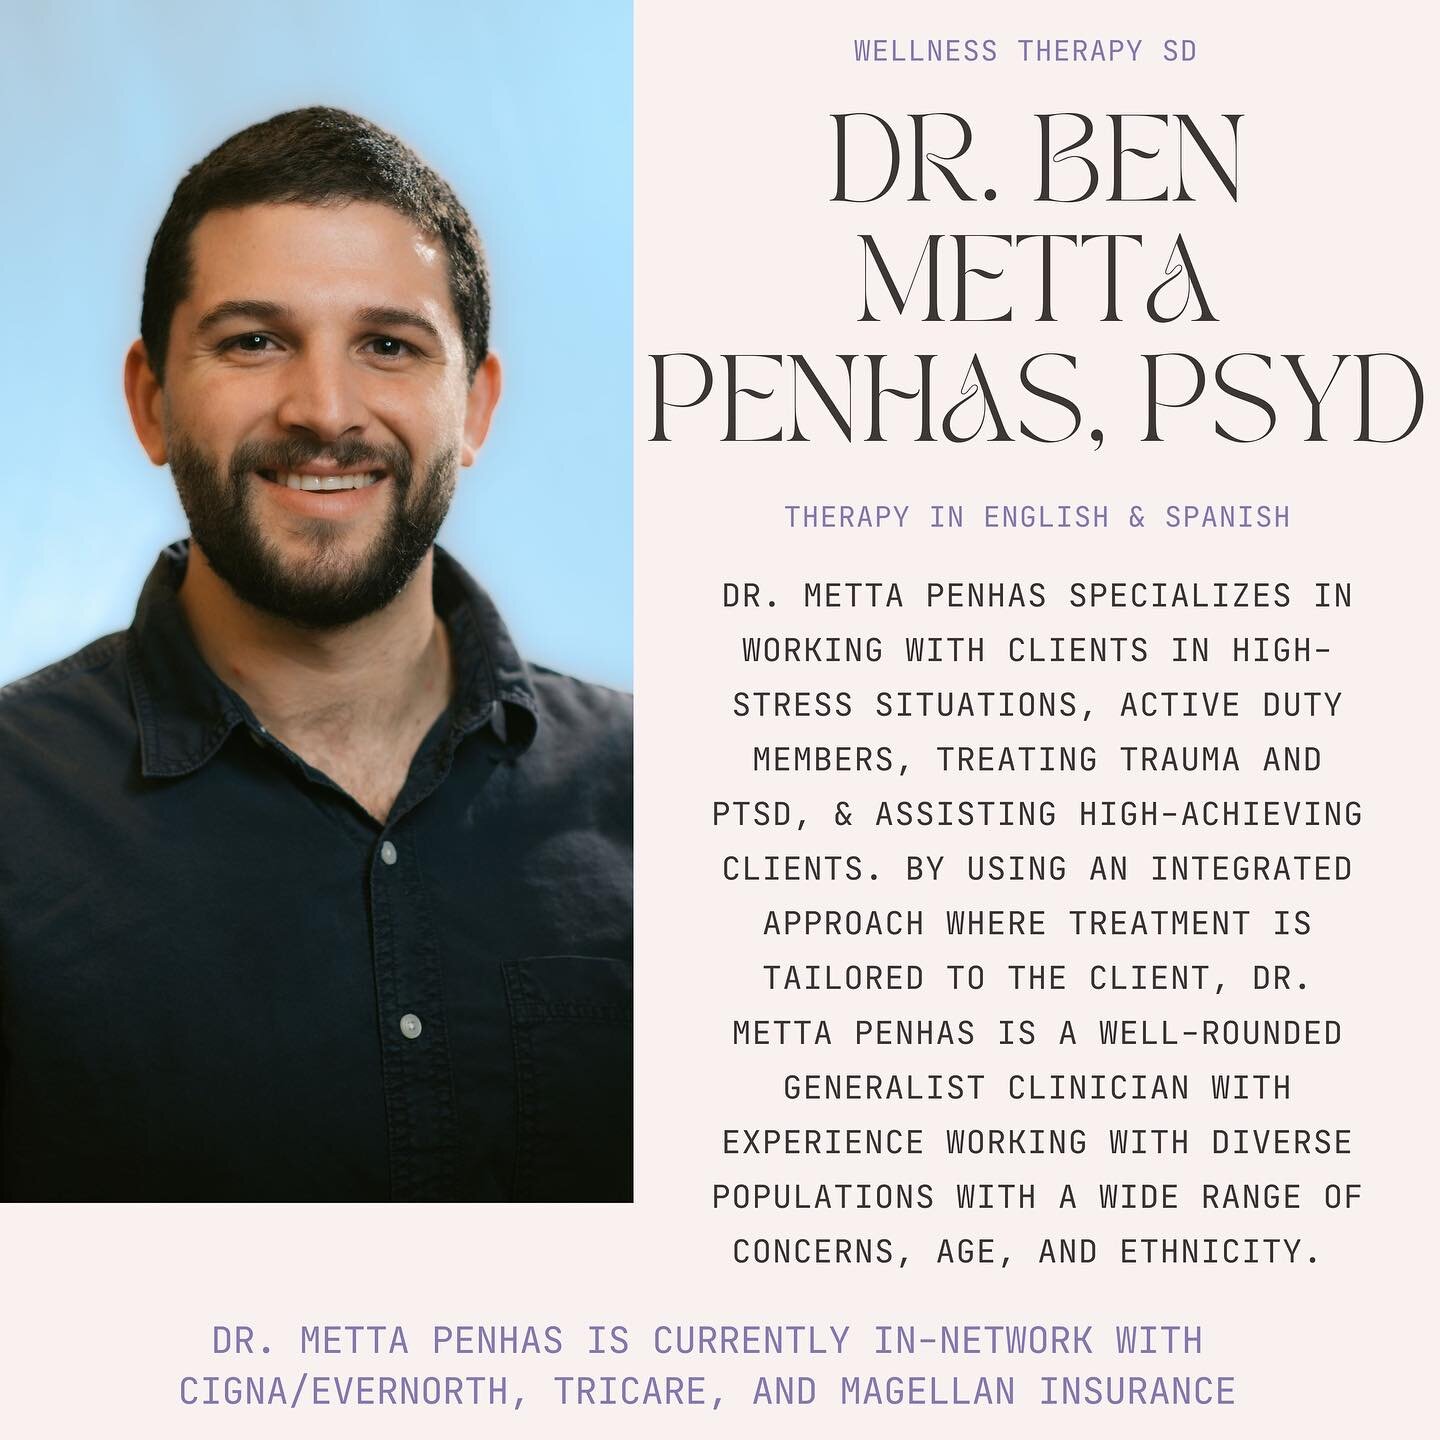 Dr. Metta Penhas is currently accepting new clients! Click the link in our bio to schedule an appointment! 

#wellness #sandiego #sandiegotherapist #mentalhealth #psychology #mindfulness #selfcare #growth #cbt #happy #selflove #love